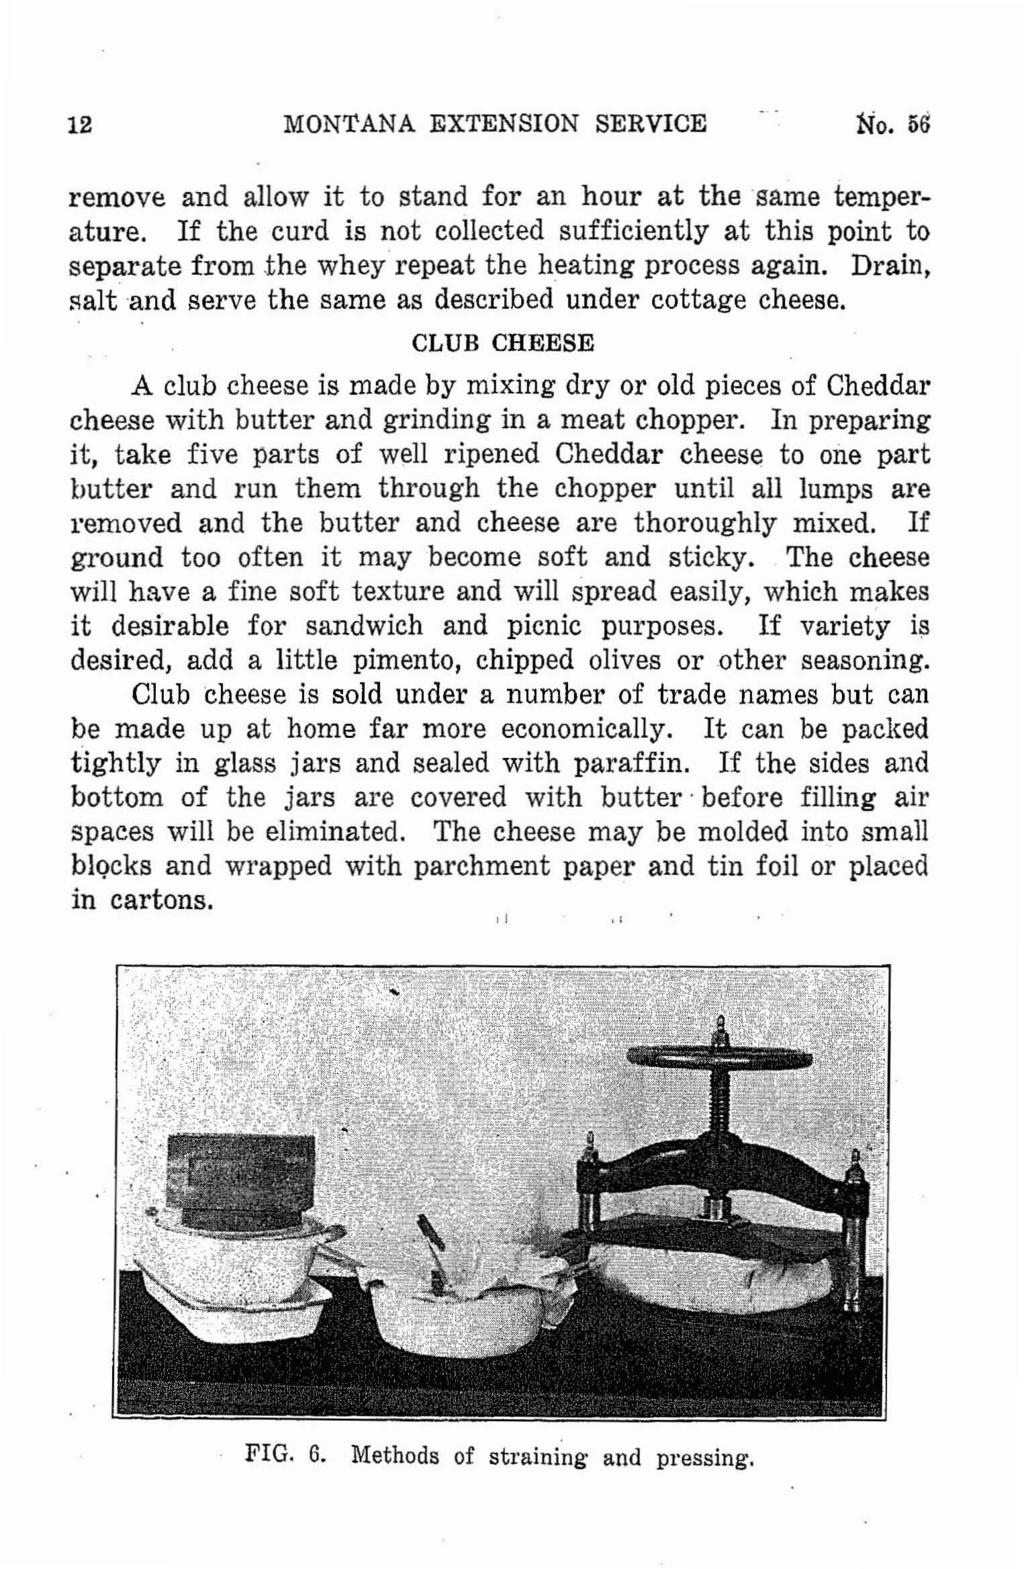 12 MONTANA EXTENSION SERVICE No. 56 remove and allow it to stand for an hour at the same temperature. If the curd is not collected sufficiently at this point to separate from.